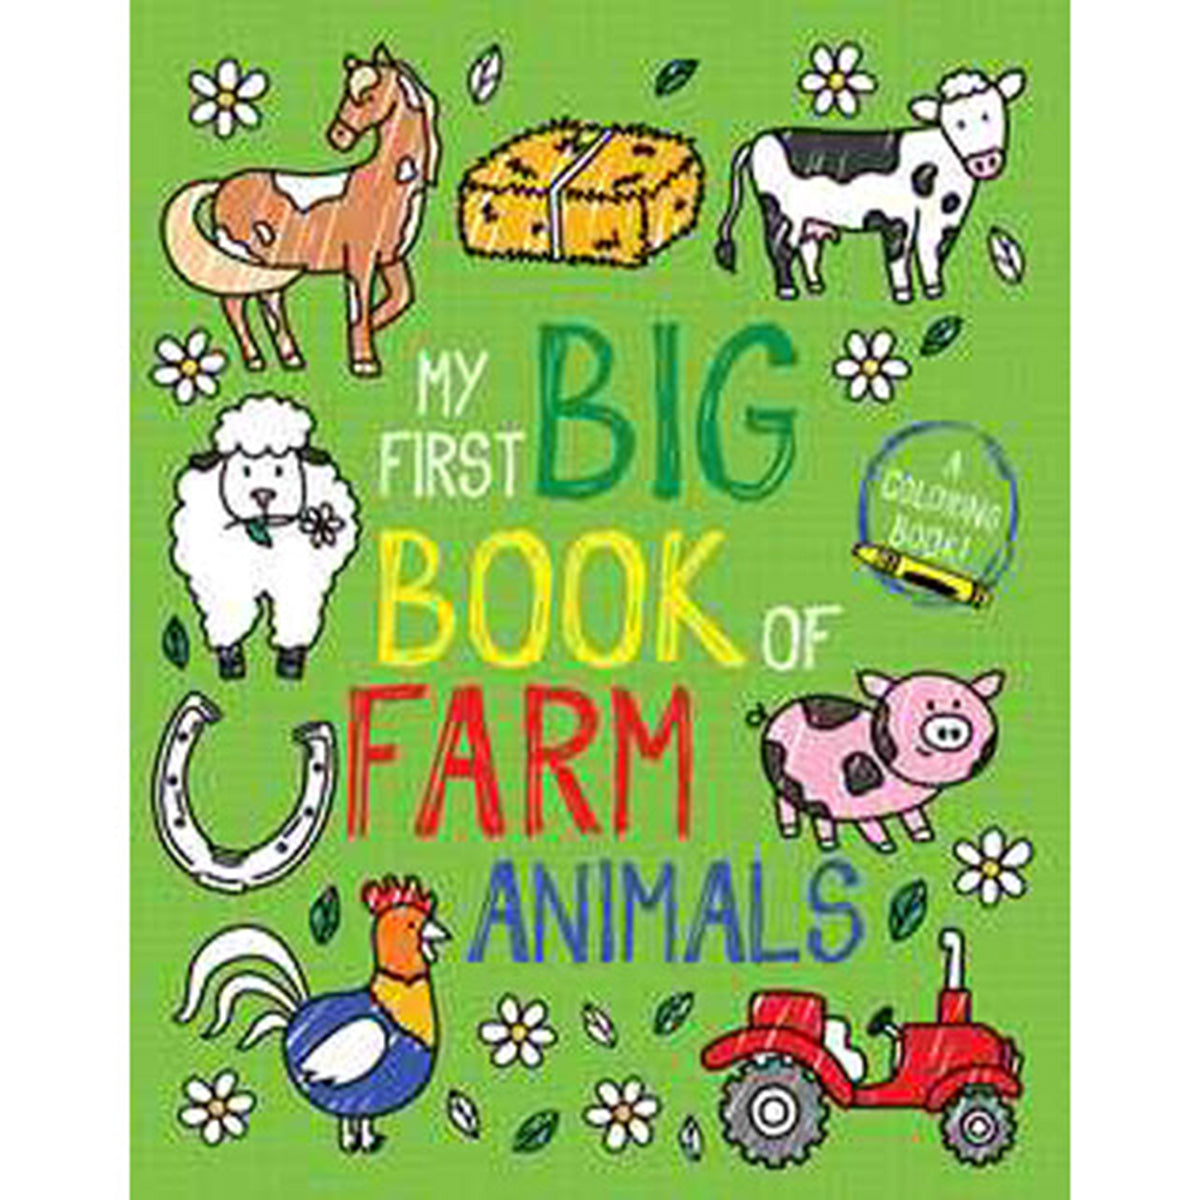 My First Big Book of Farm Animals Coloring Book